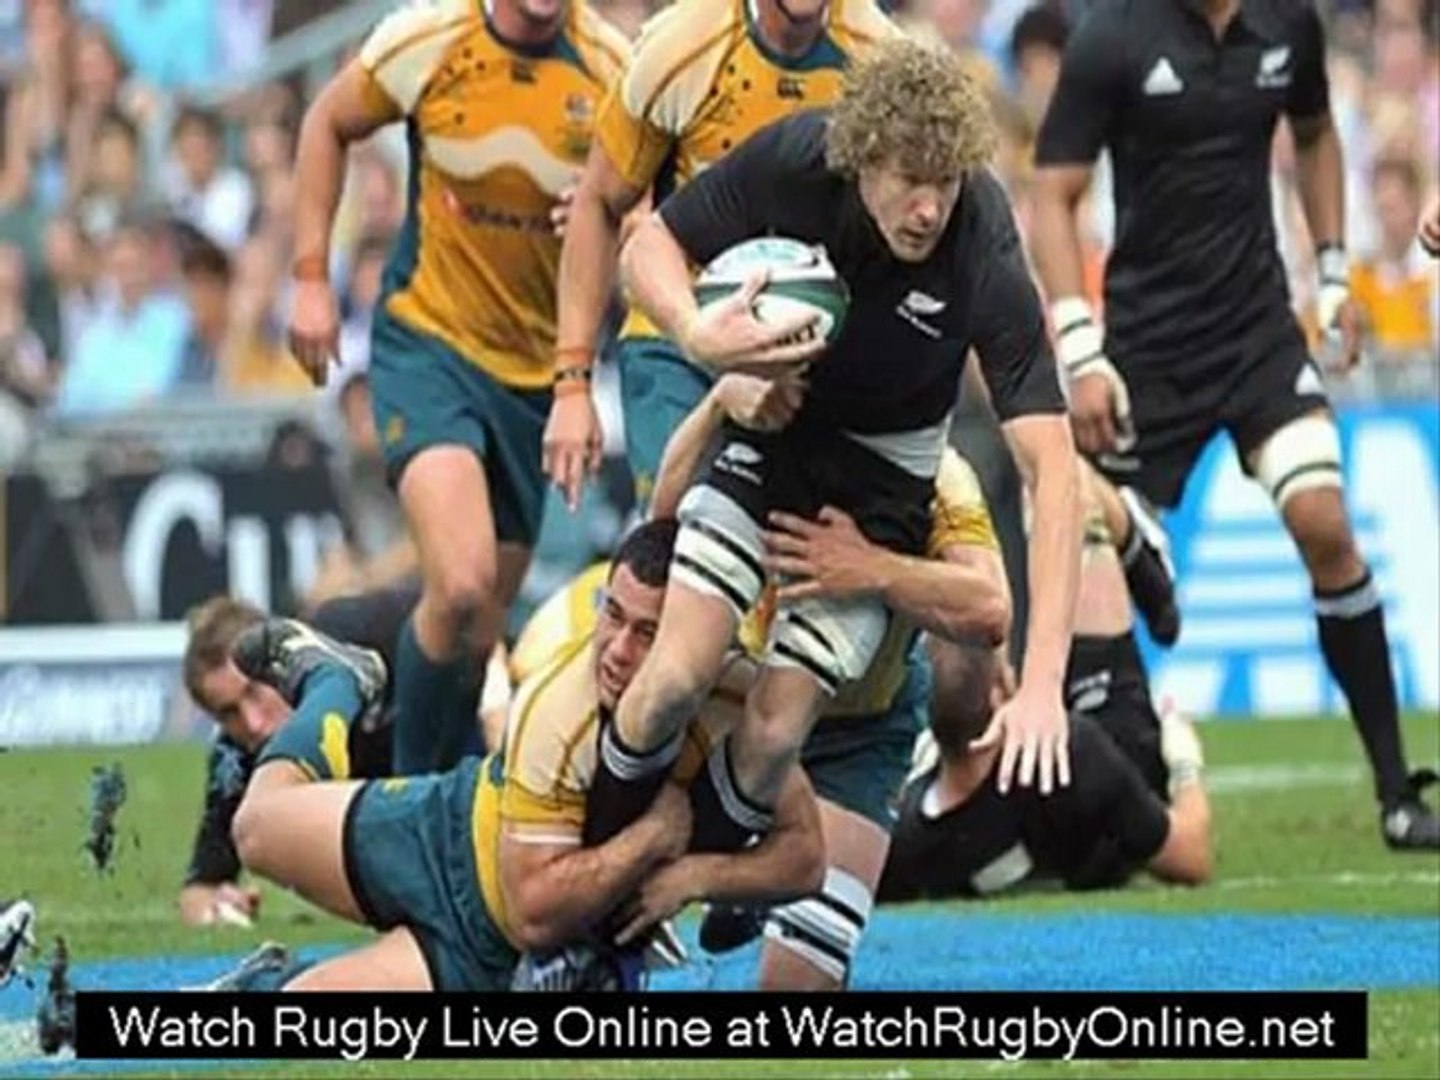 rugby union online